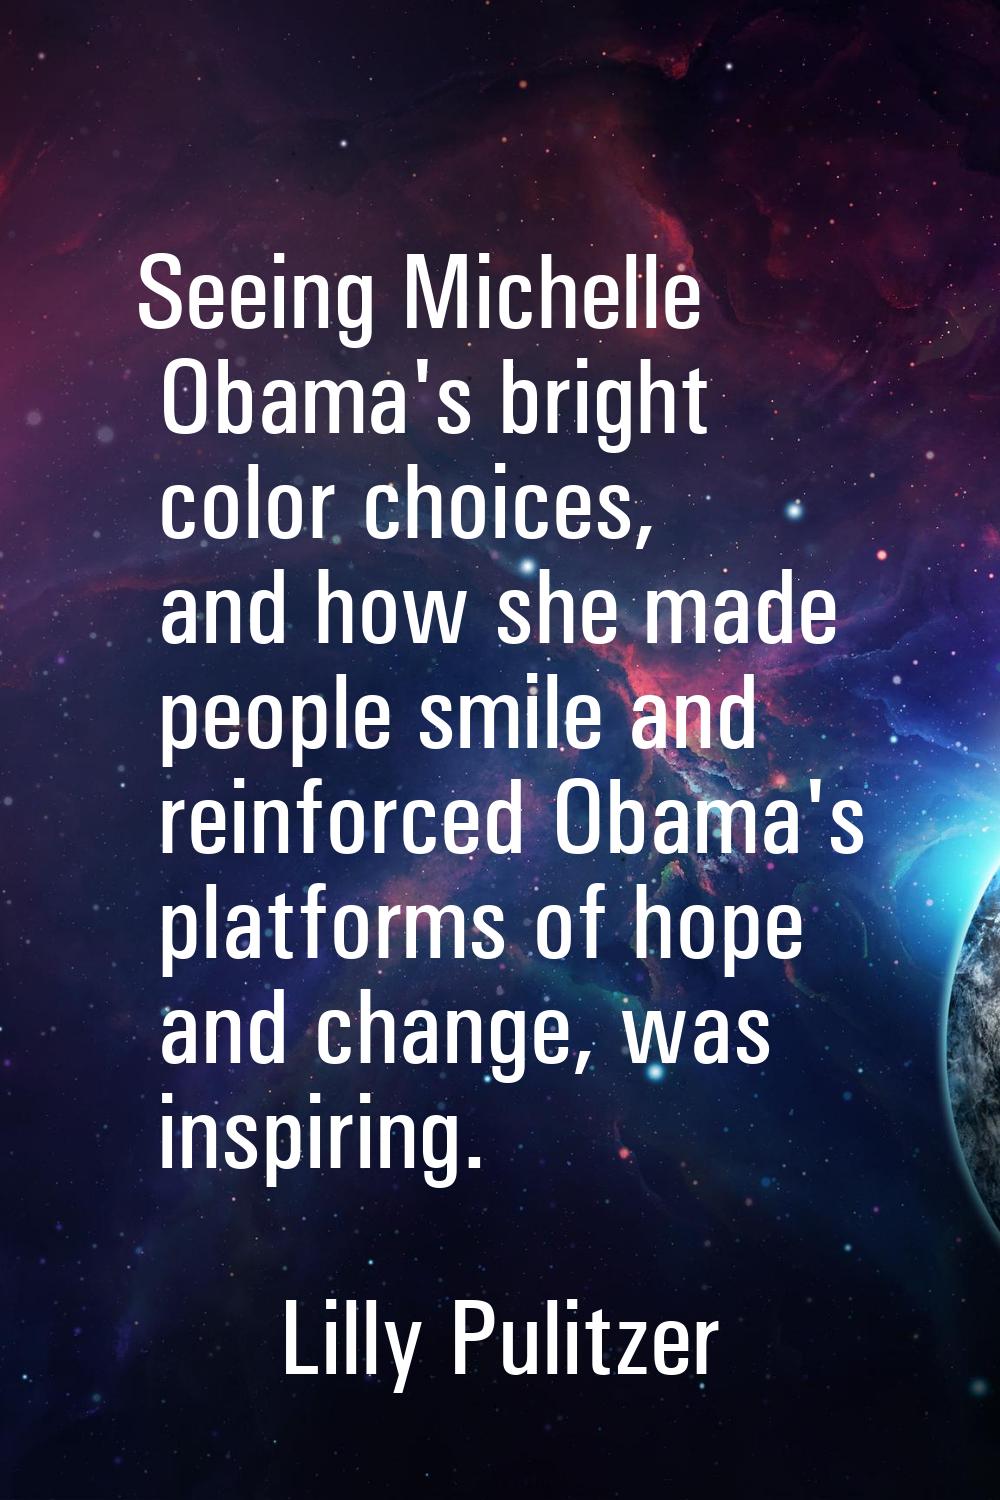 Seeing Michelle Obama's bright color choices, and how she made people smile and reinforced Obama's 